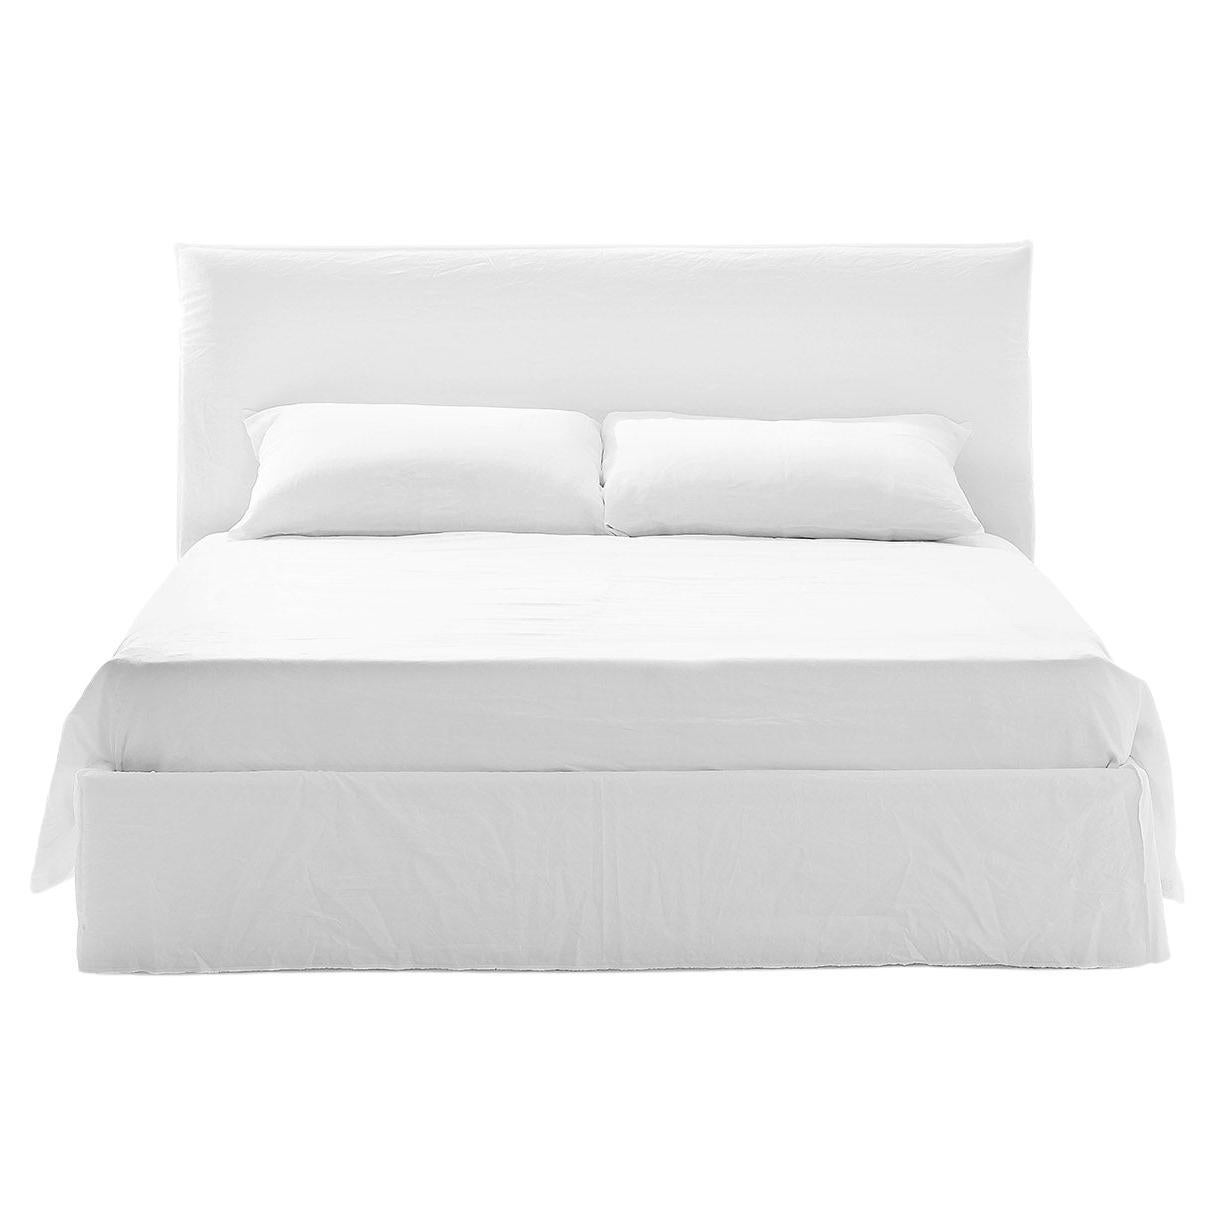 Gervasoni Ghost 80 King Knock Down Bed in White Linen Upholstery by Paola Navone